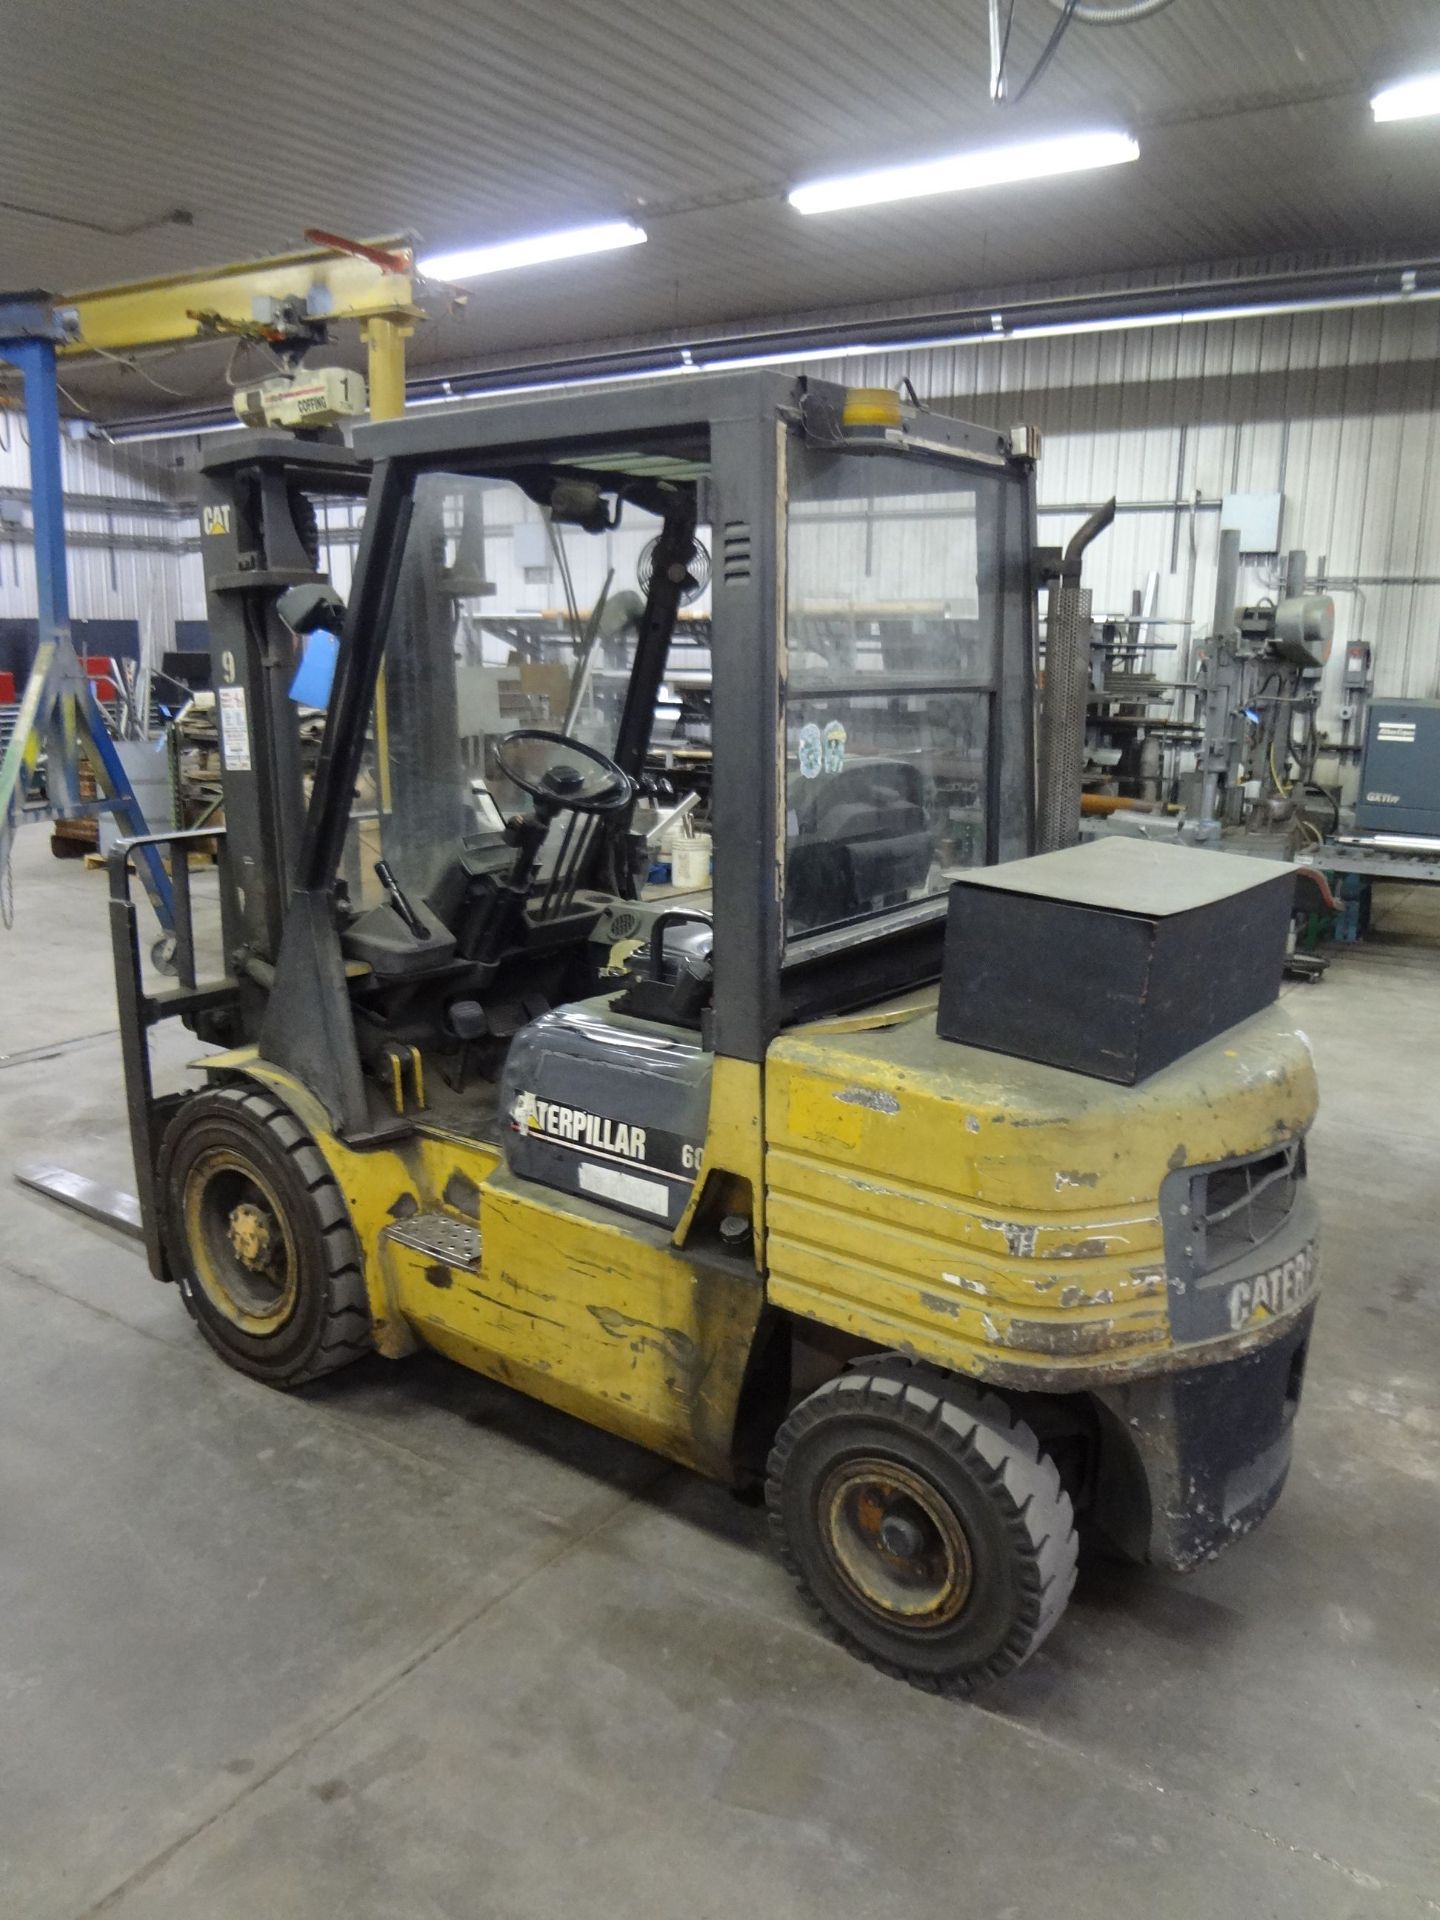 6,000 LB. CATERPILLAR MODEL DP-30 PNEUMATIC TIRE, DIESEL POWERED LIFT TRUCK; S/N 7KM3577, 2-STAGE - Image 4 of 7